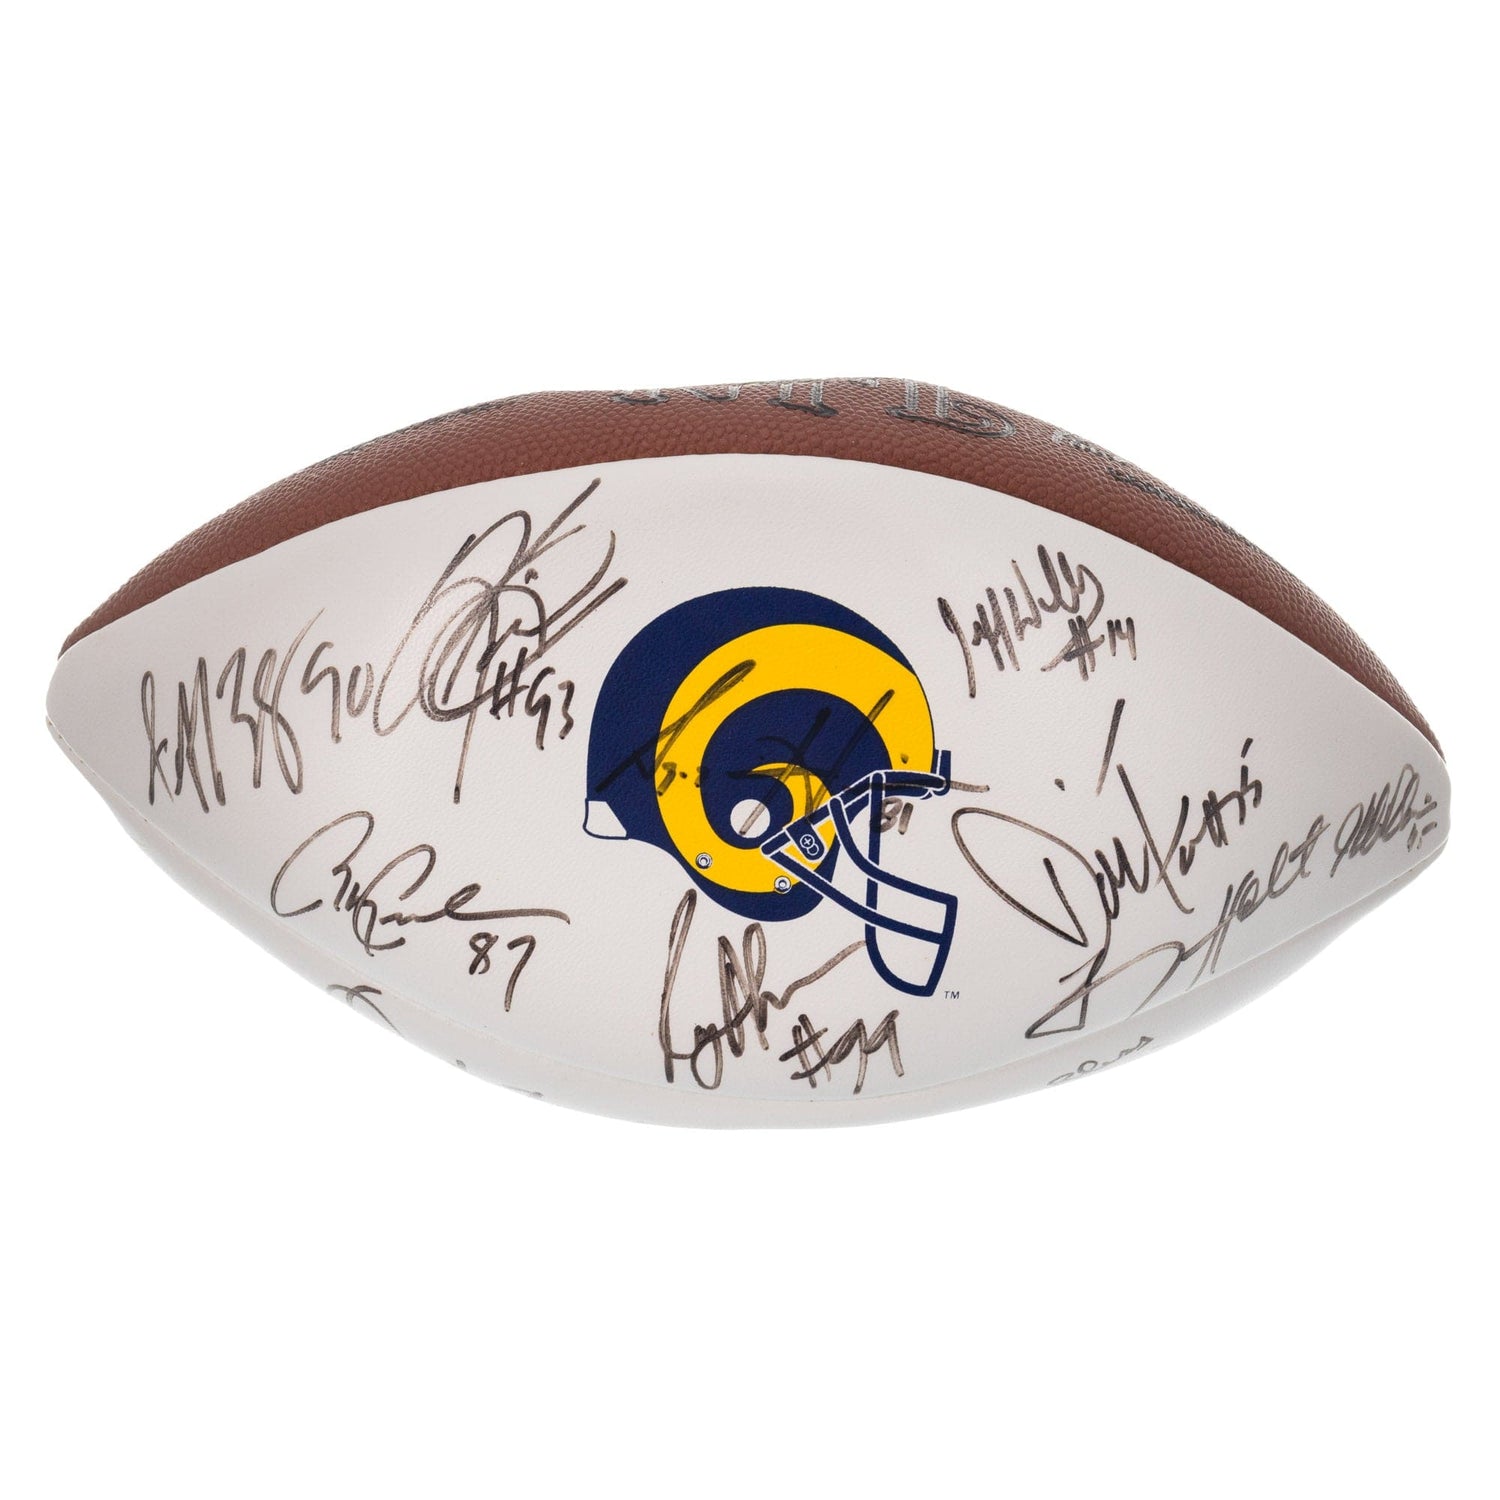 2001 St. Louis Rams Super Bowl Team Signed Football ZOOM